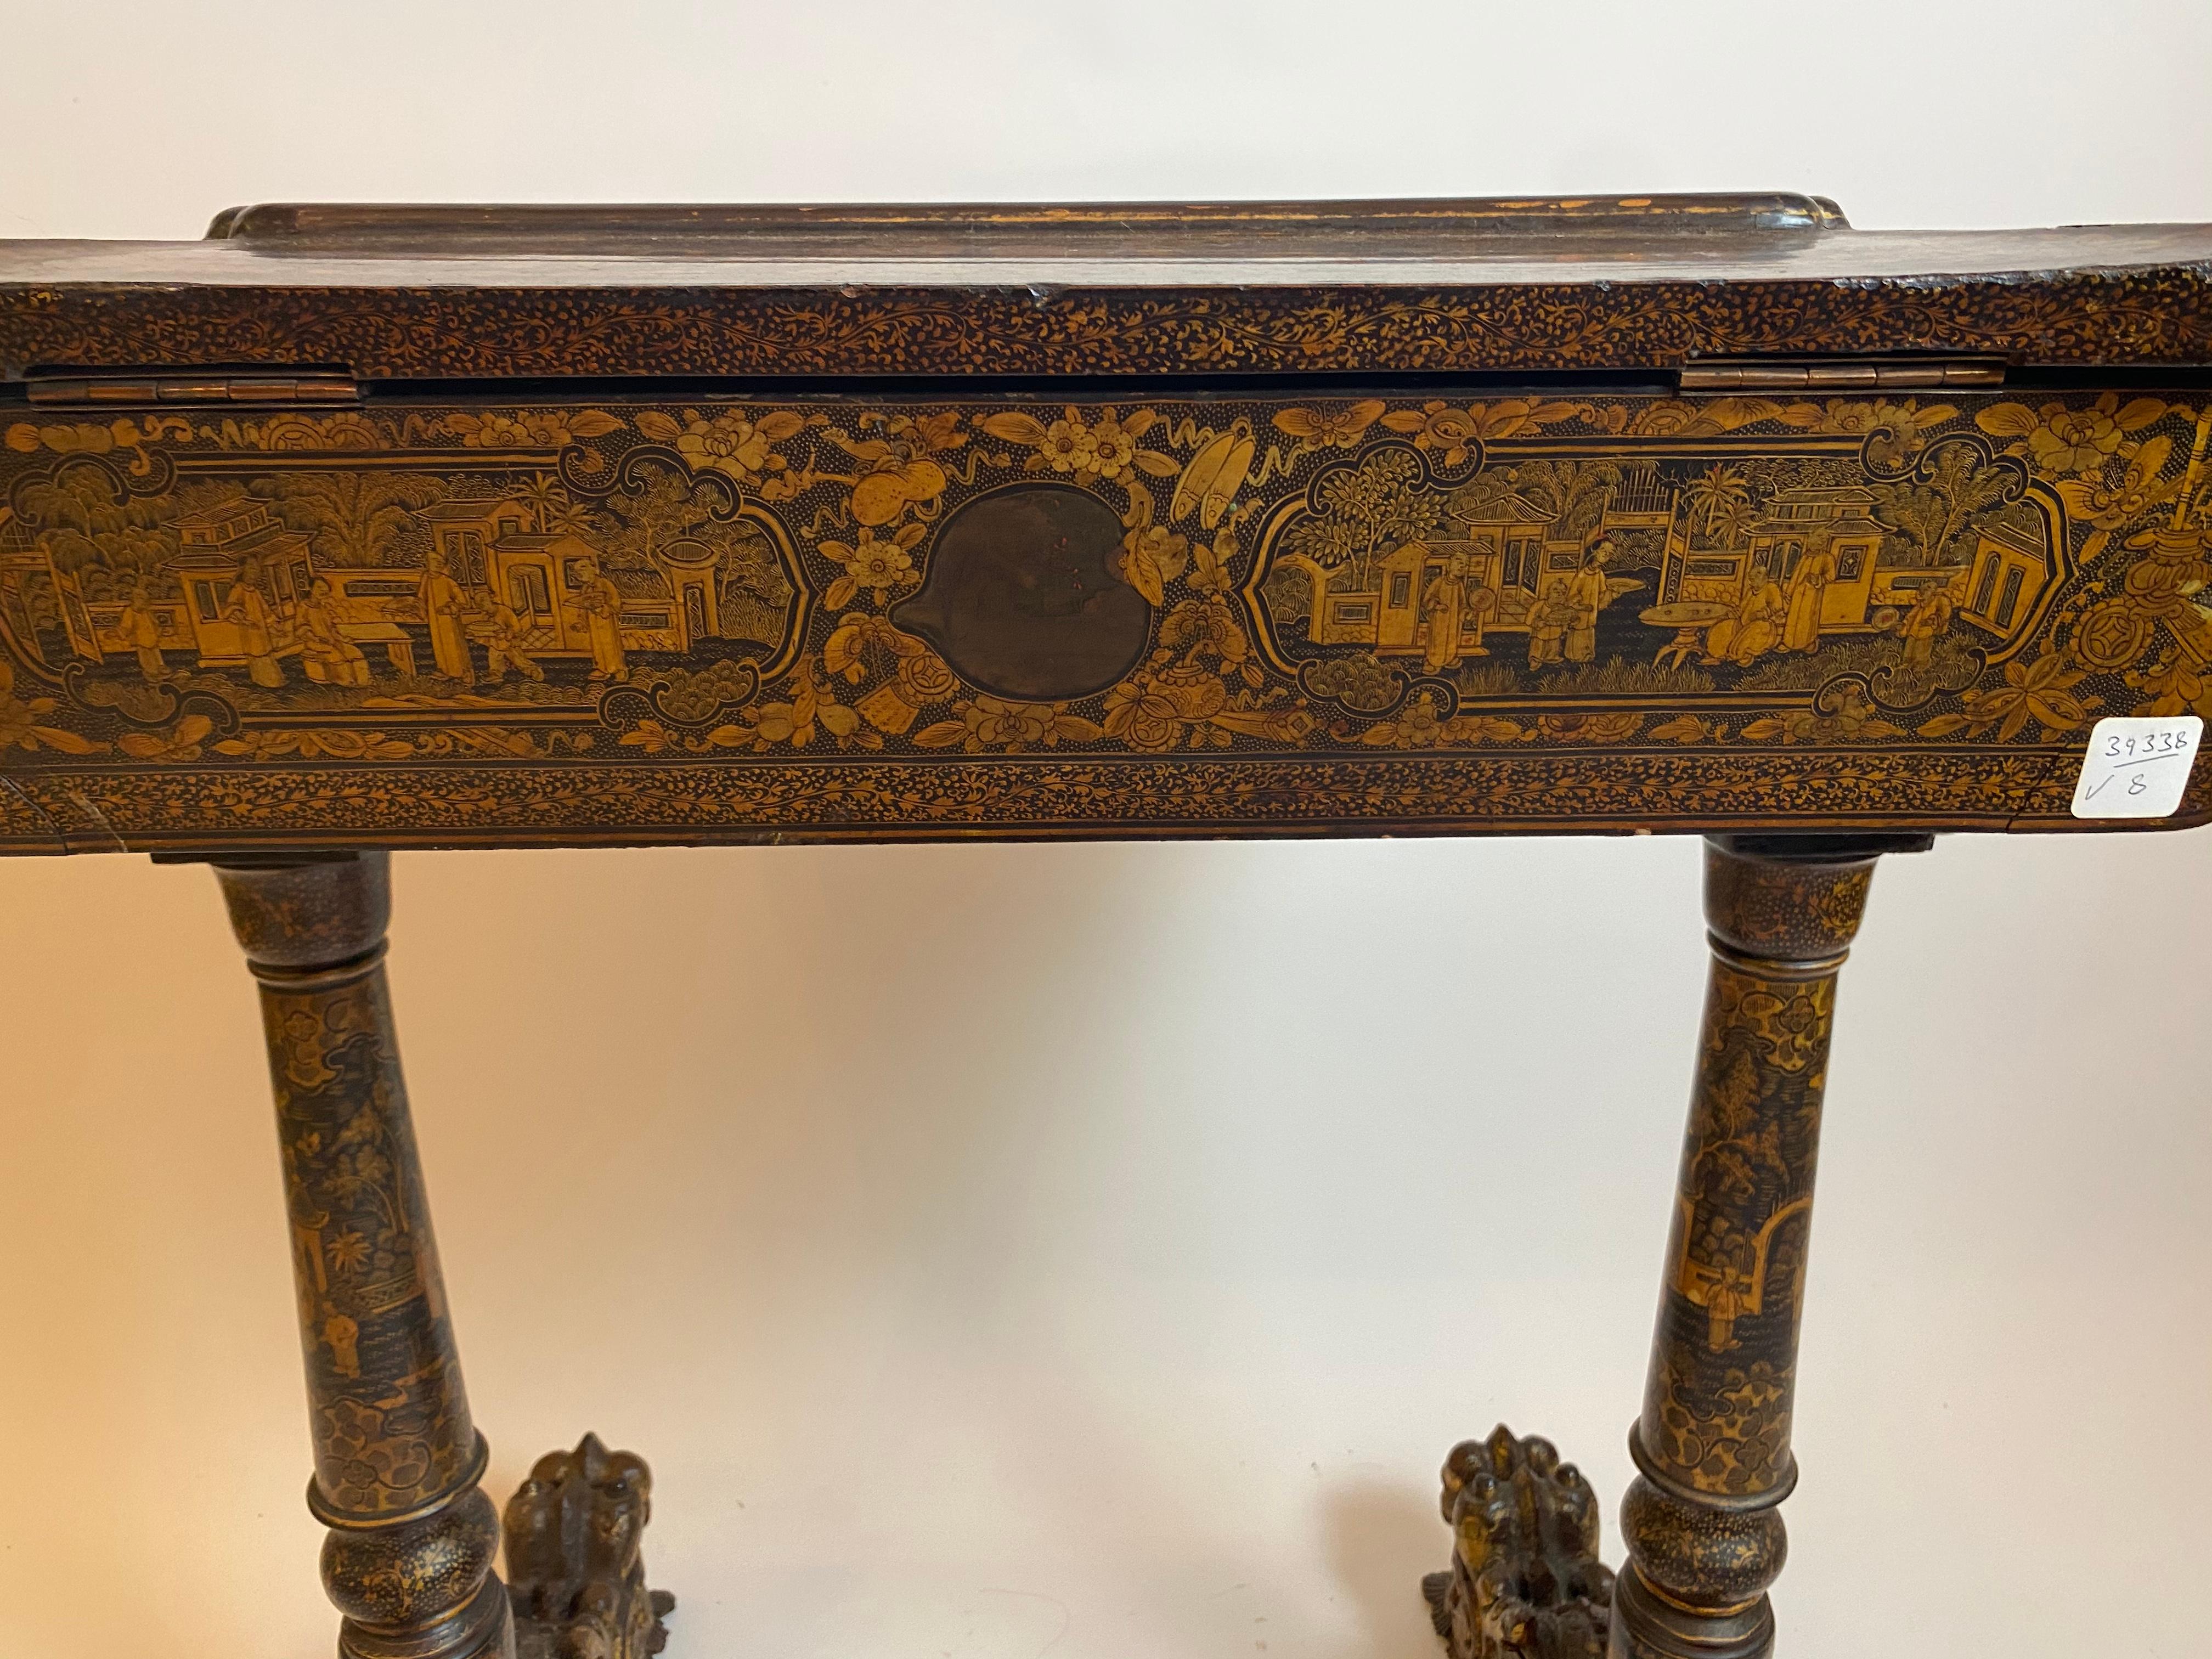 Early 19th Century Chinese Export Lacquer and Gilt Work Table For Sale 14